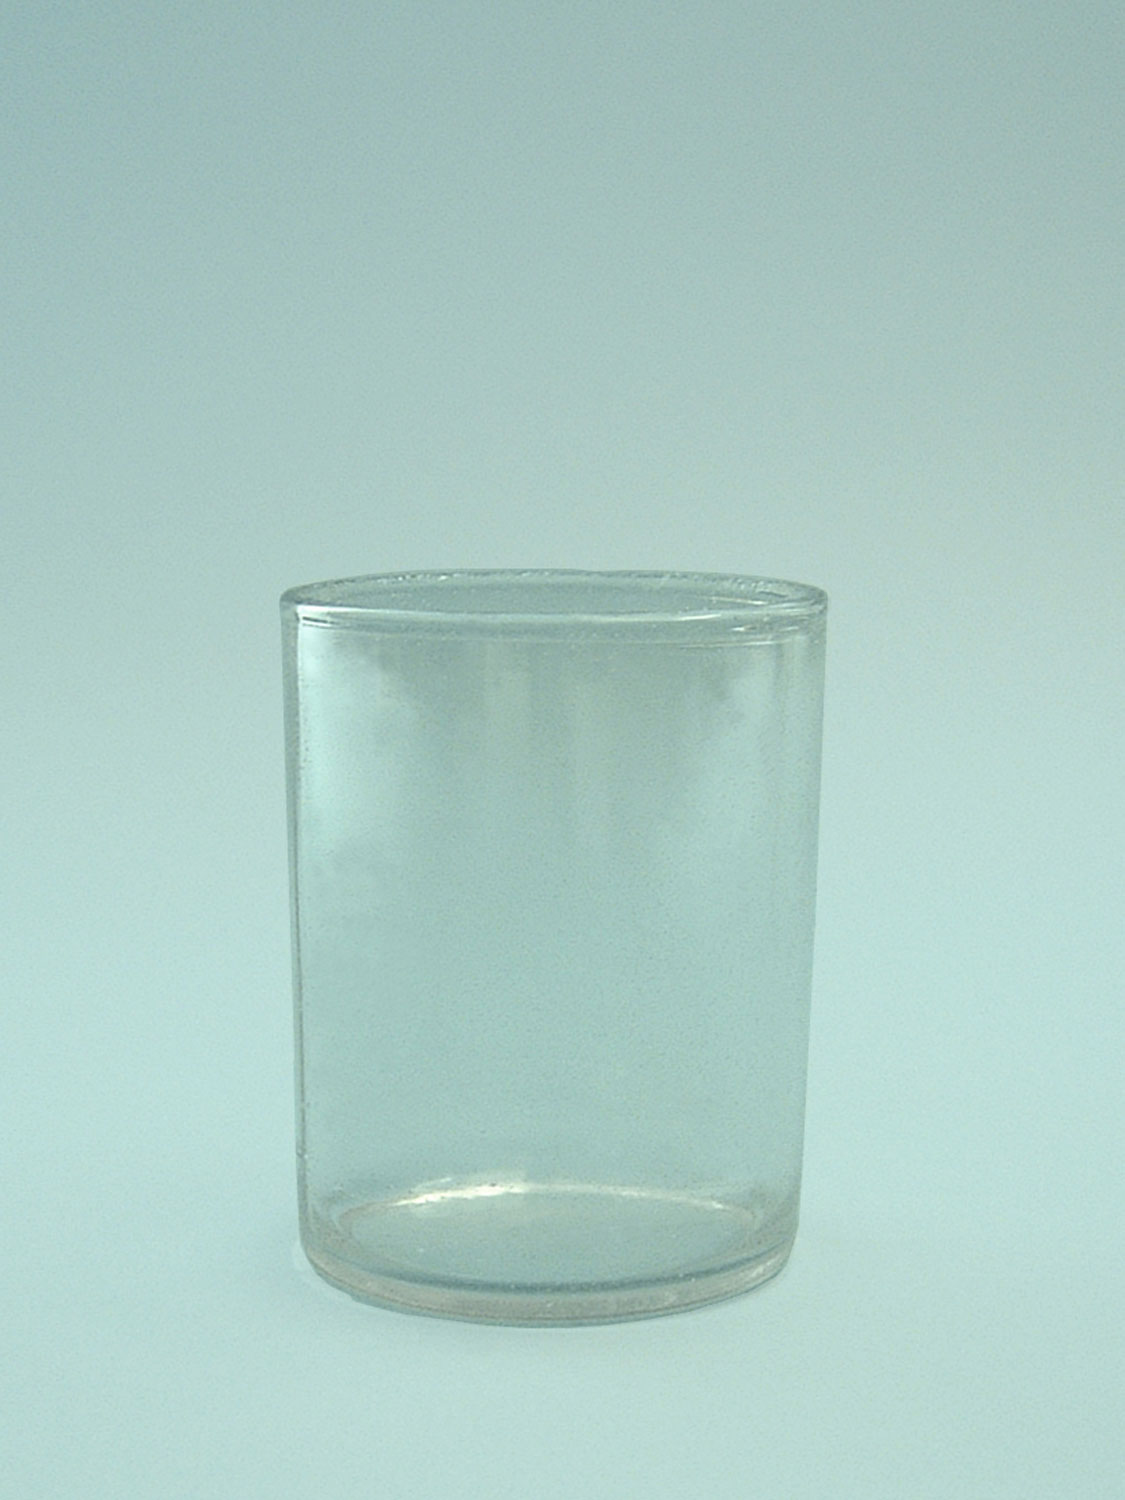 Sugar glass water glass. 9 centimeters high and 7.3 cm in diameter.